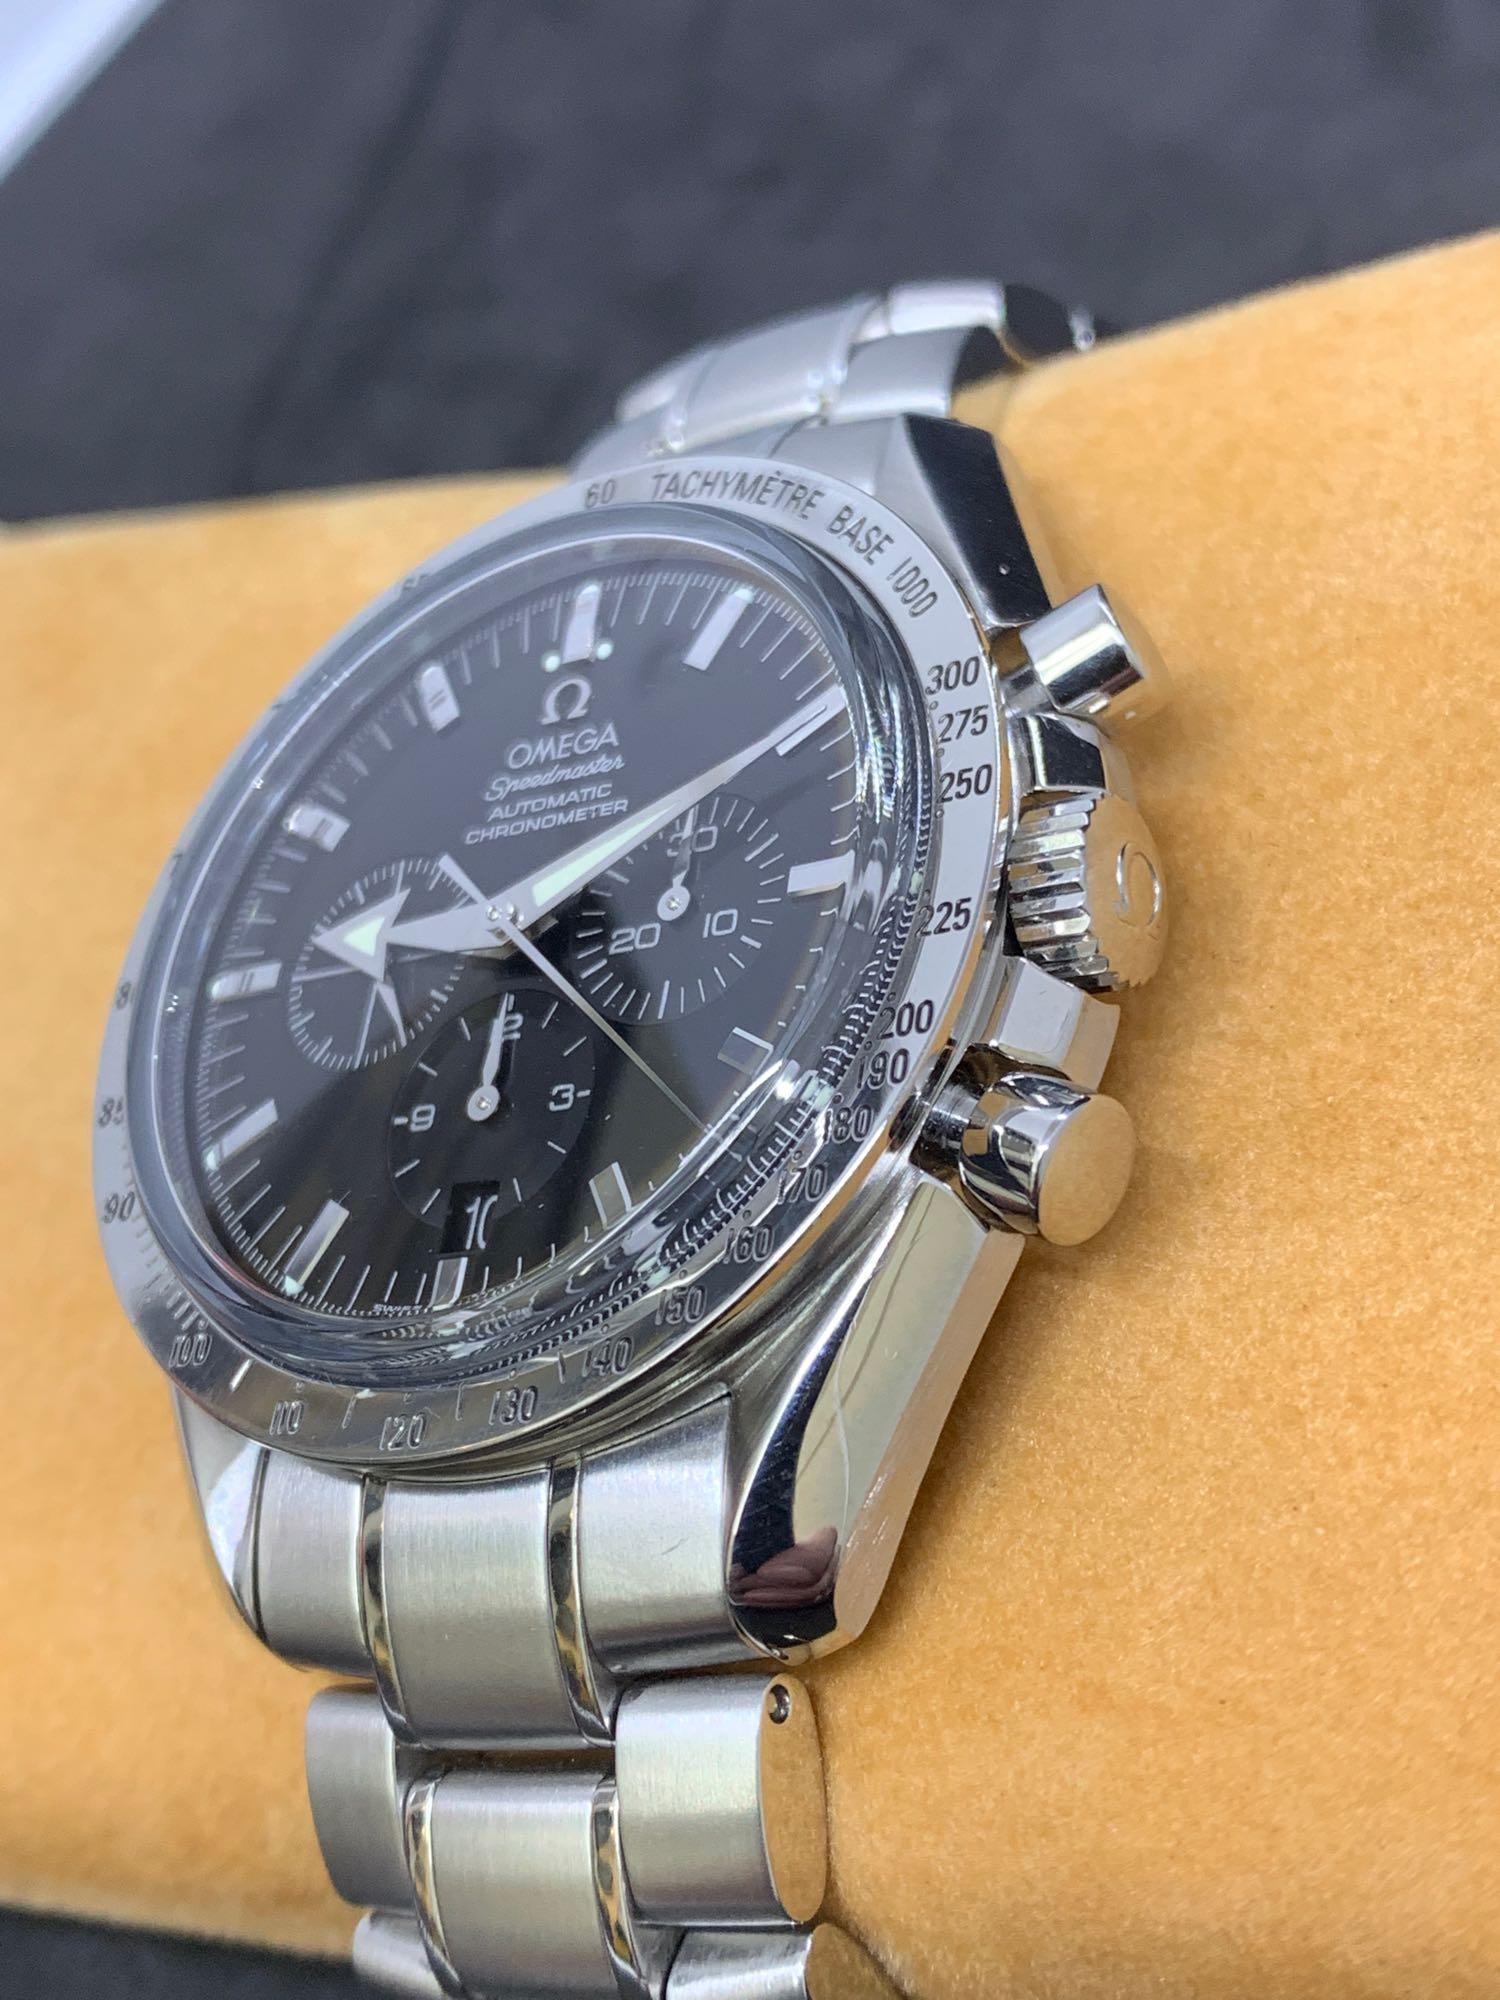 40mm Omega Speedmaster Chrono Watch Stainless steel - Image 3 of 7